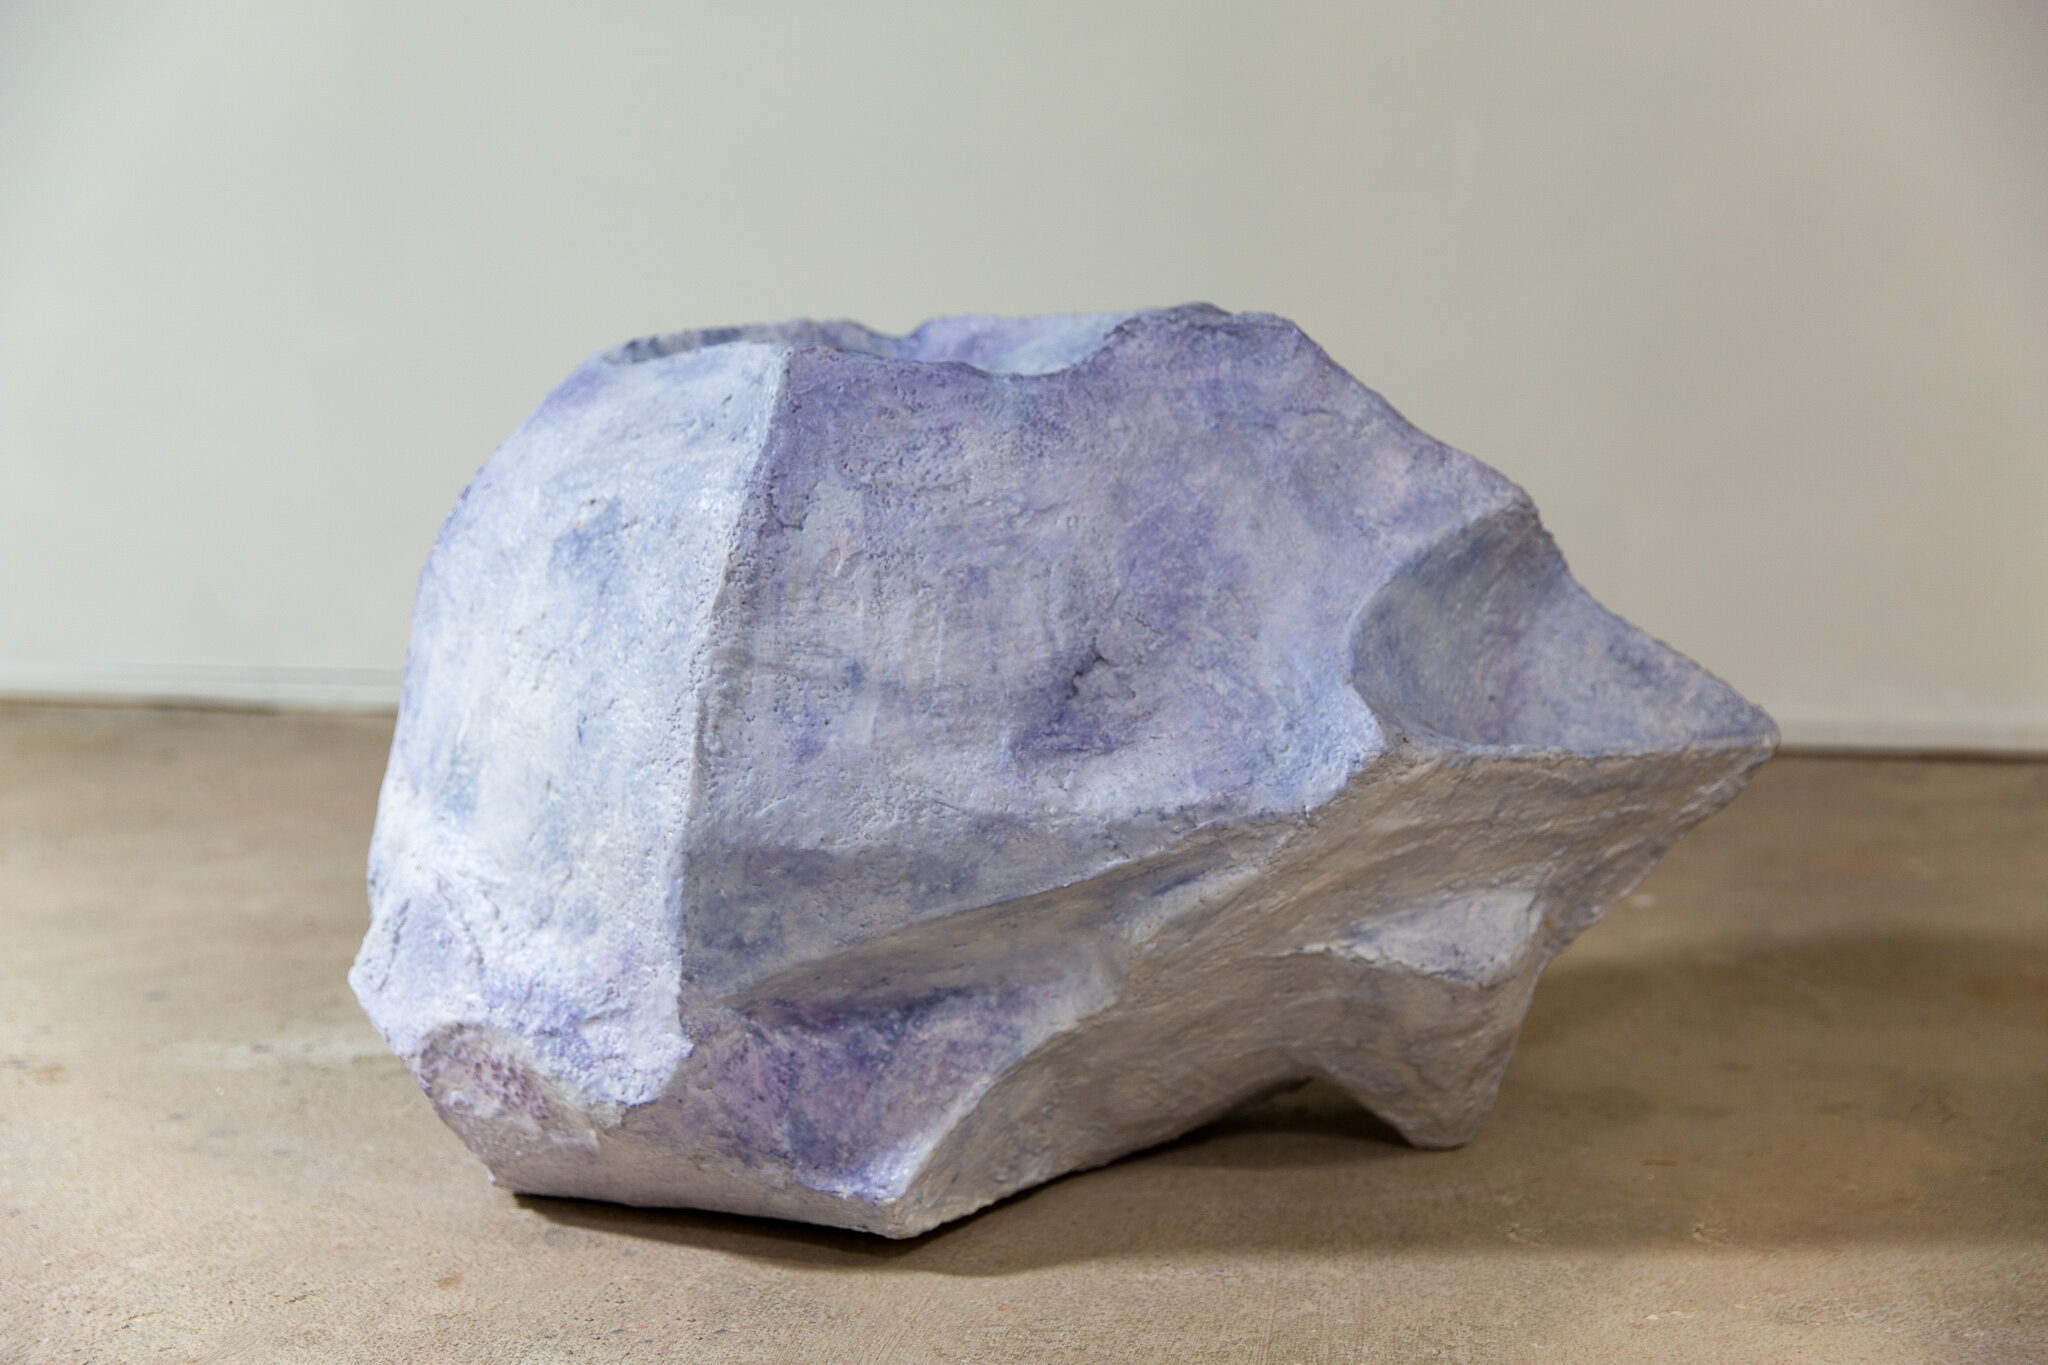   Violet Sample , 2020 Cardboard (from recycling bin), plaster, paper pulp, paint, encaustic, 26x35x18 inches 